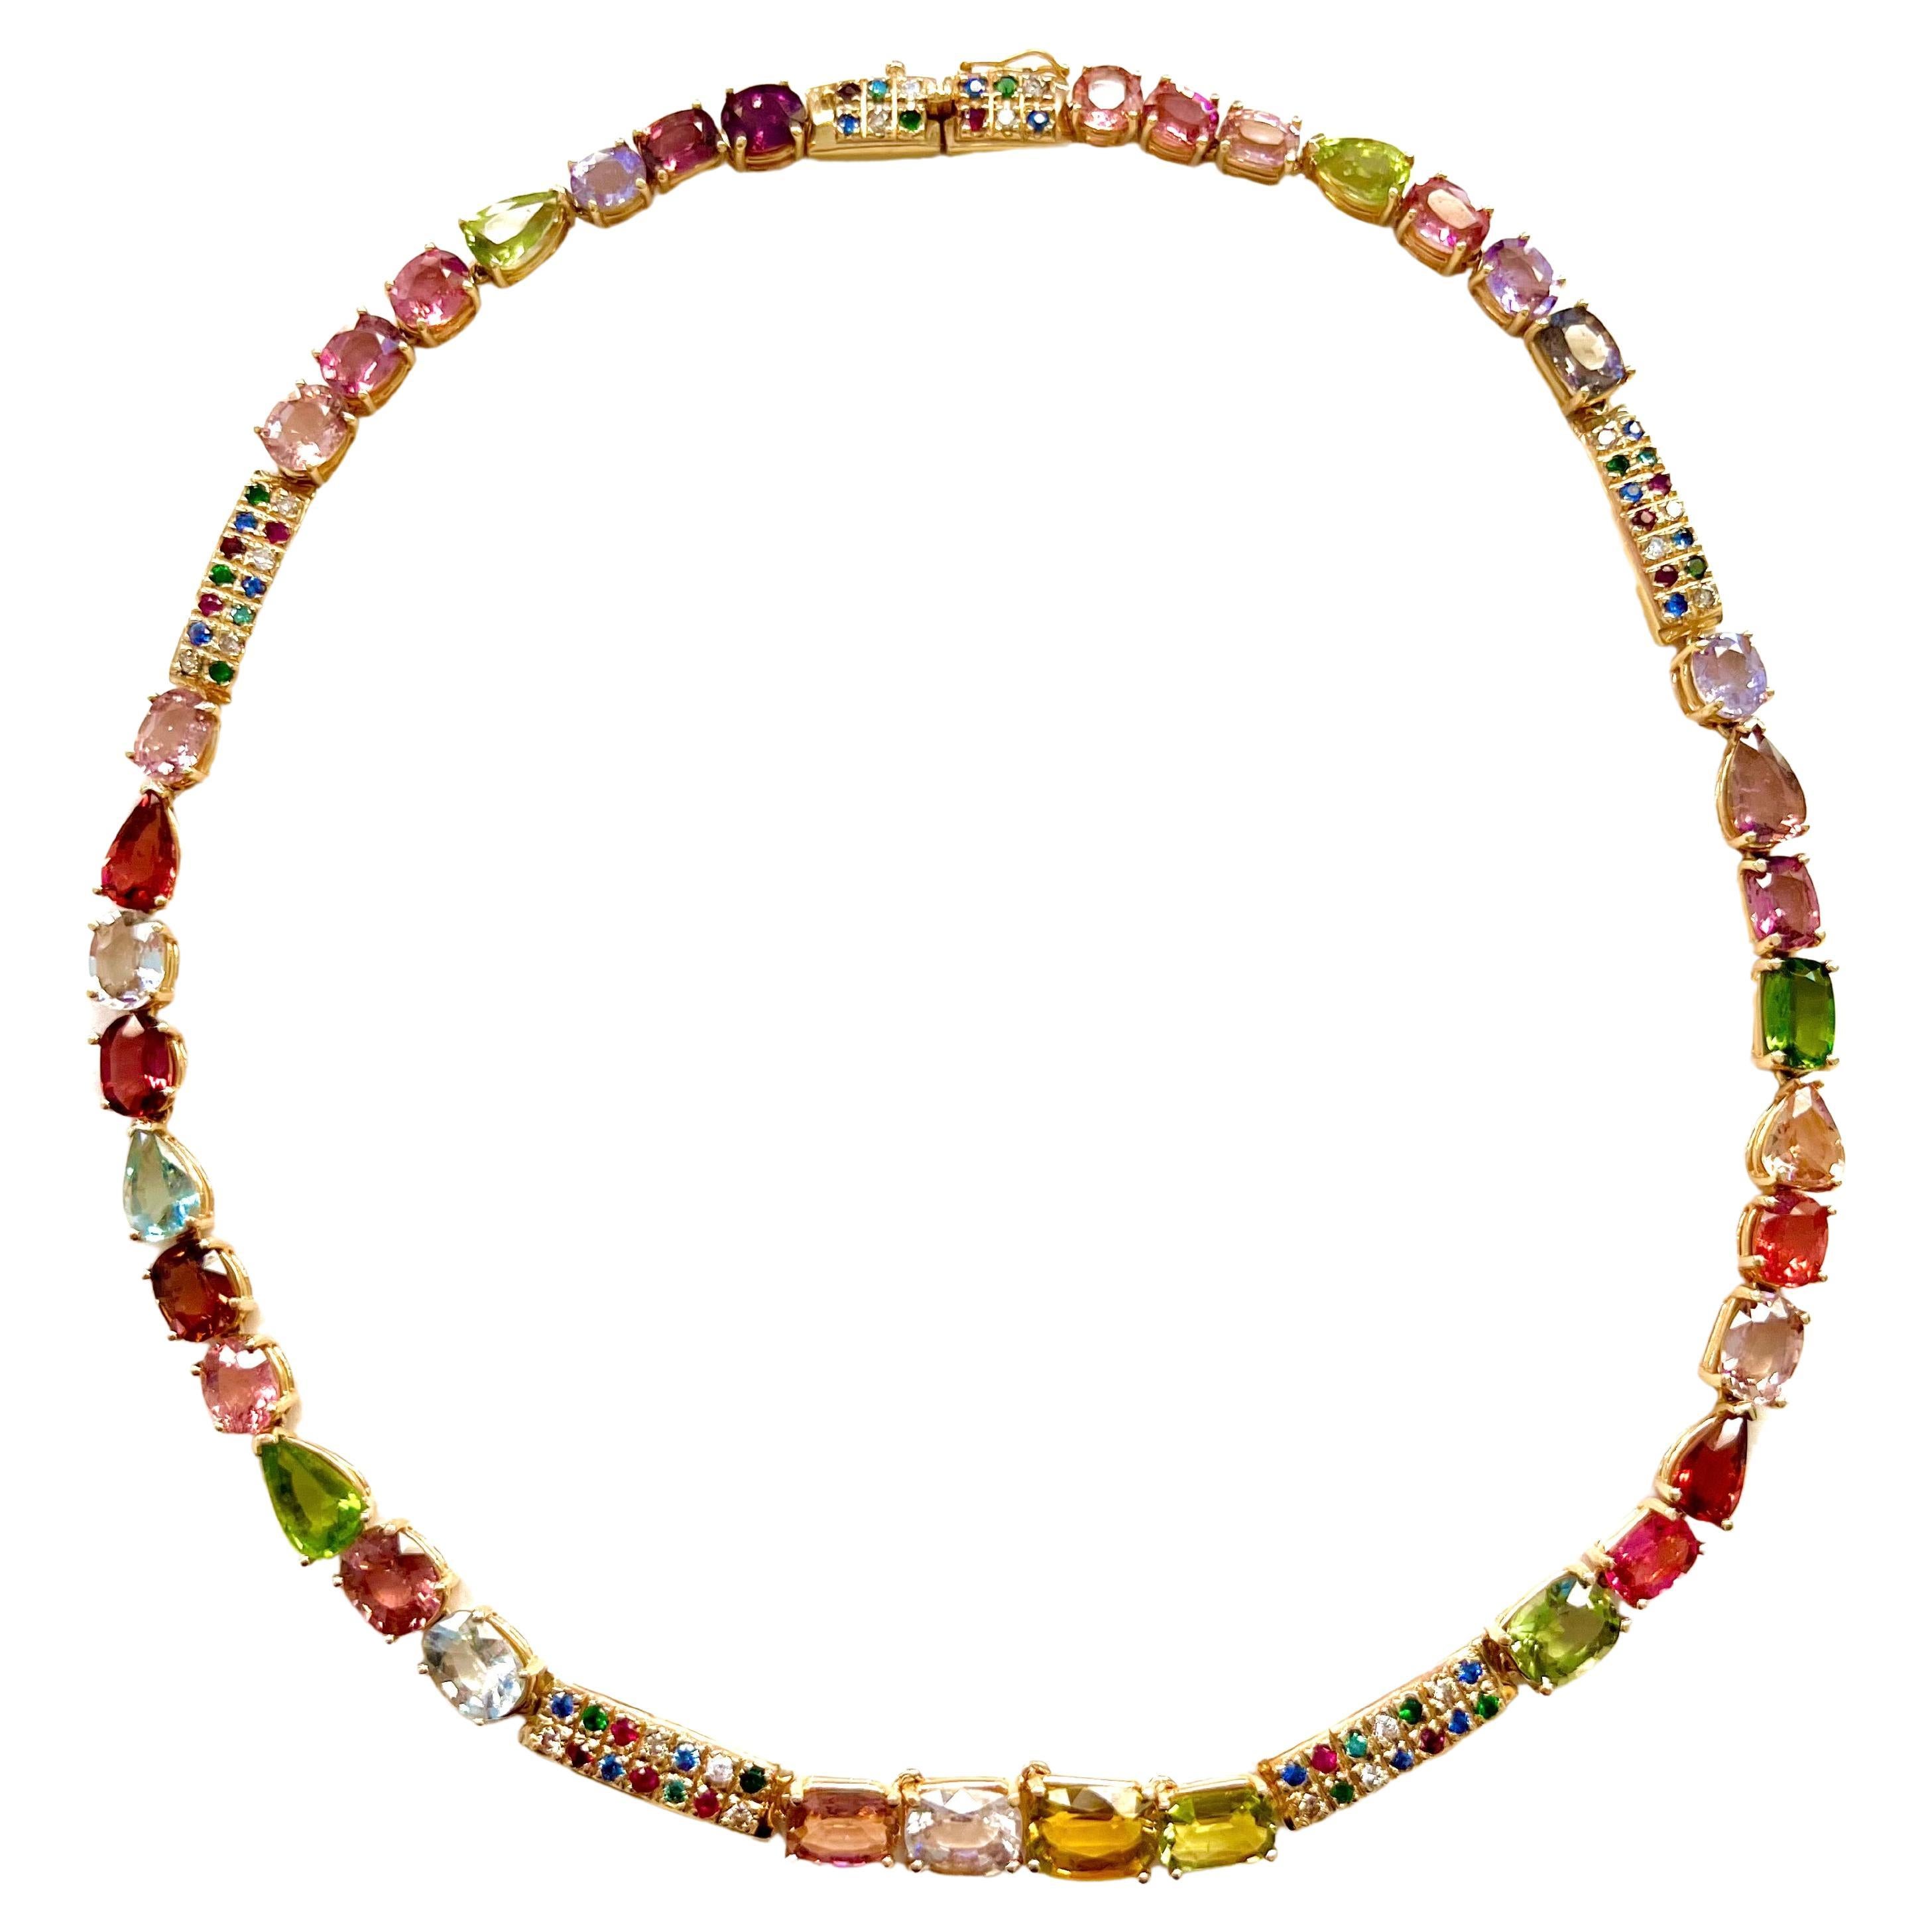 This gorgeous array of colors will get everyone's attention.  The assortment of tourmalines ranging from yellow, pink, violet, and green colors are arranged in a non-systematic order with multicolor sapphire bars intermittently .  The tourmalines